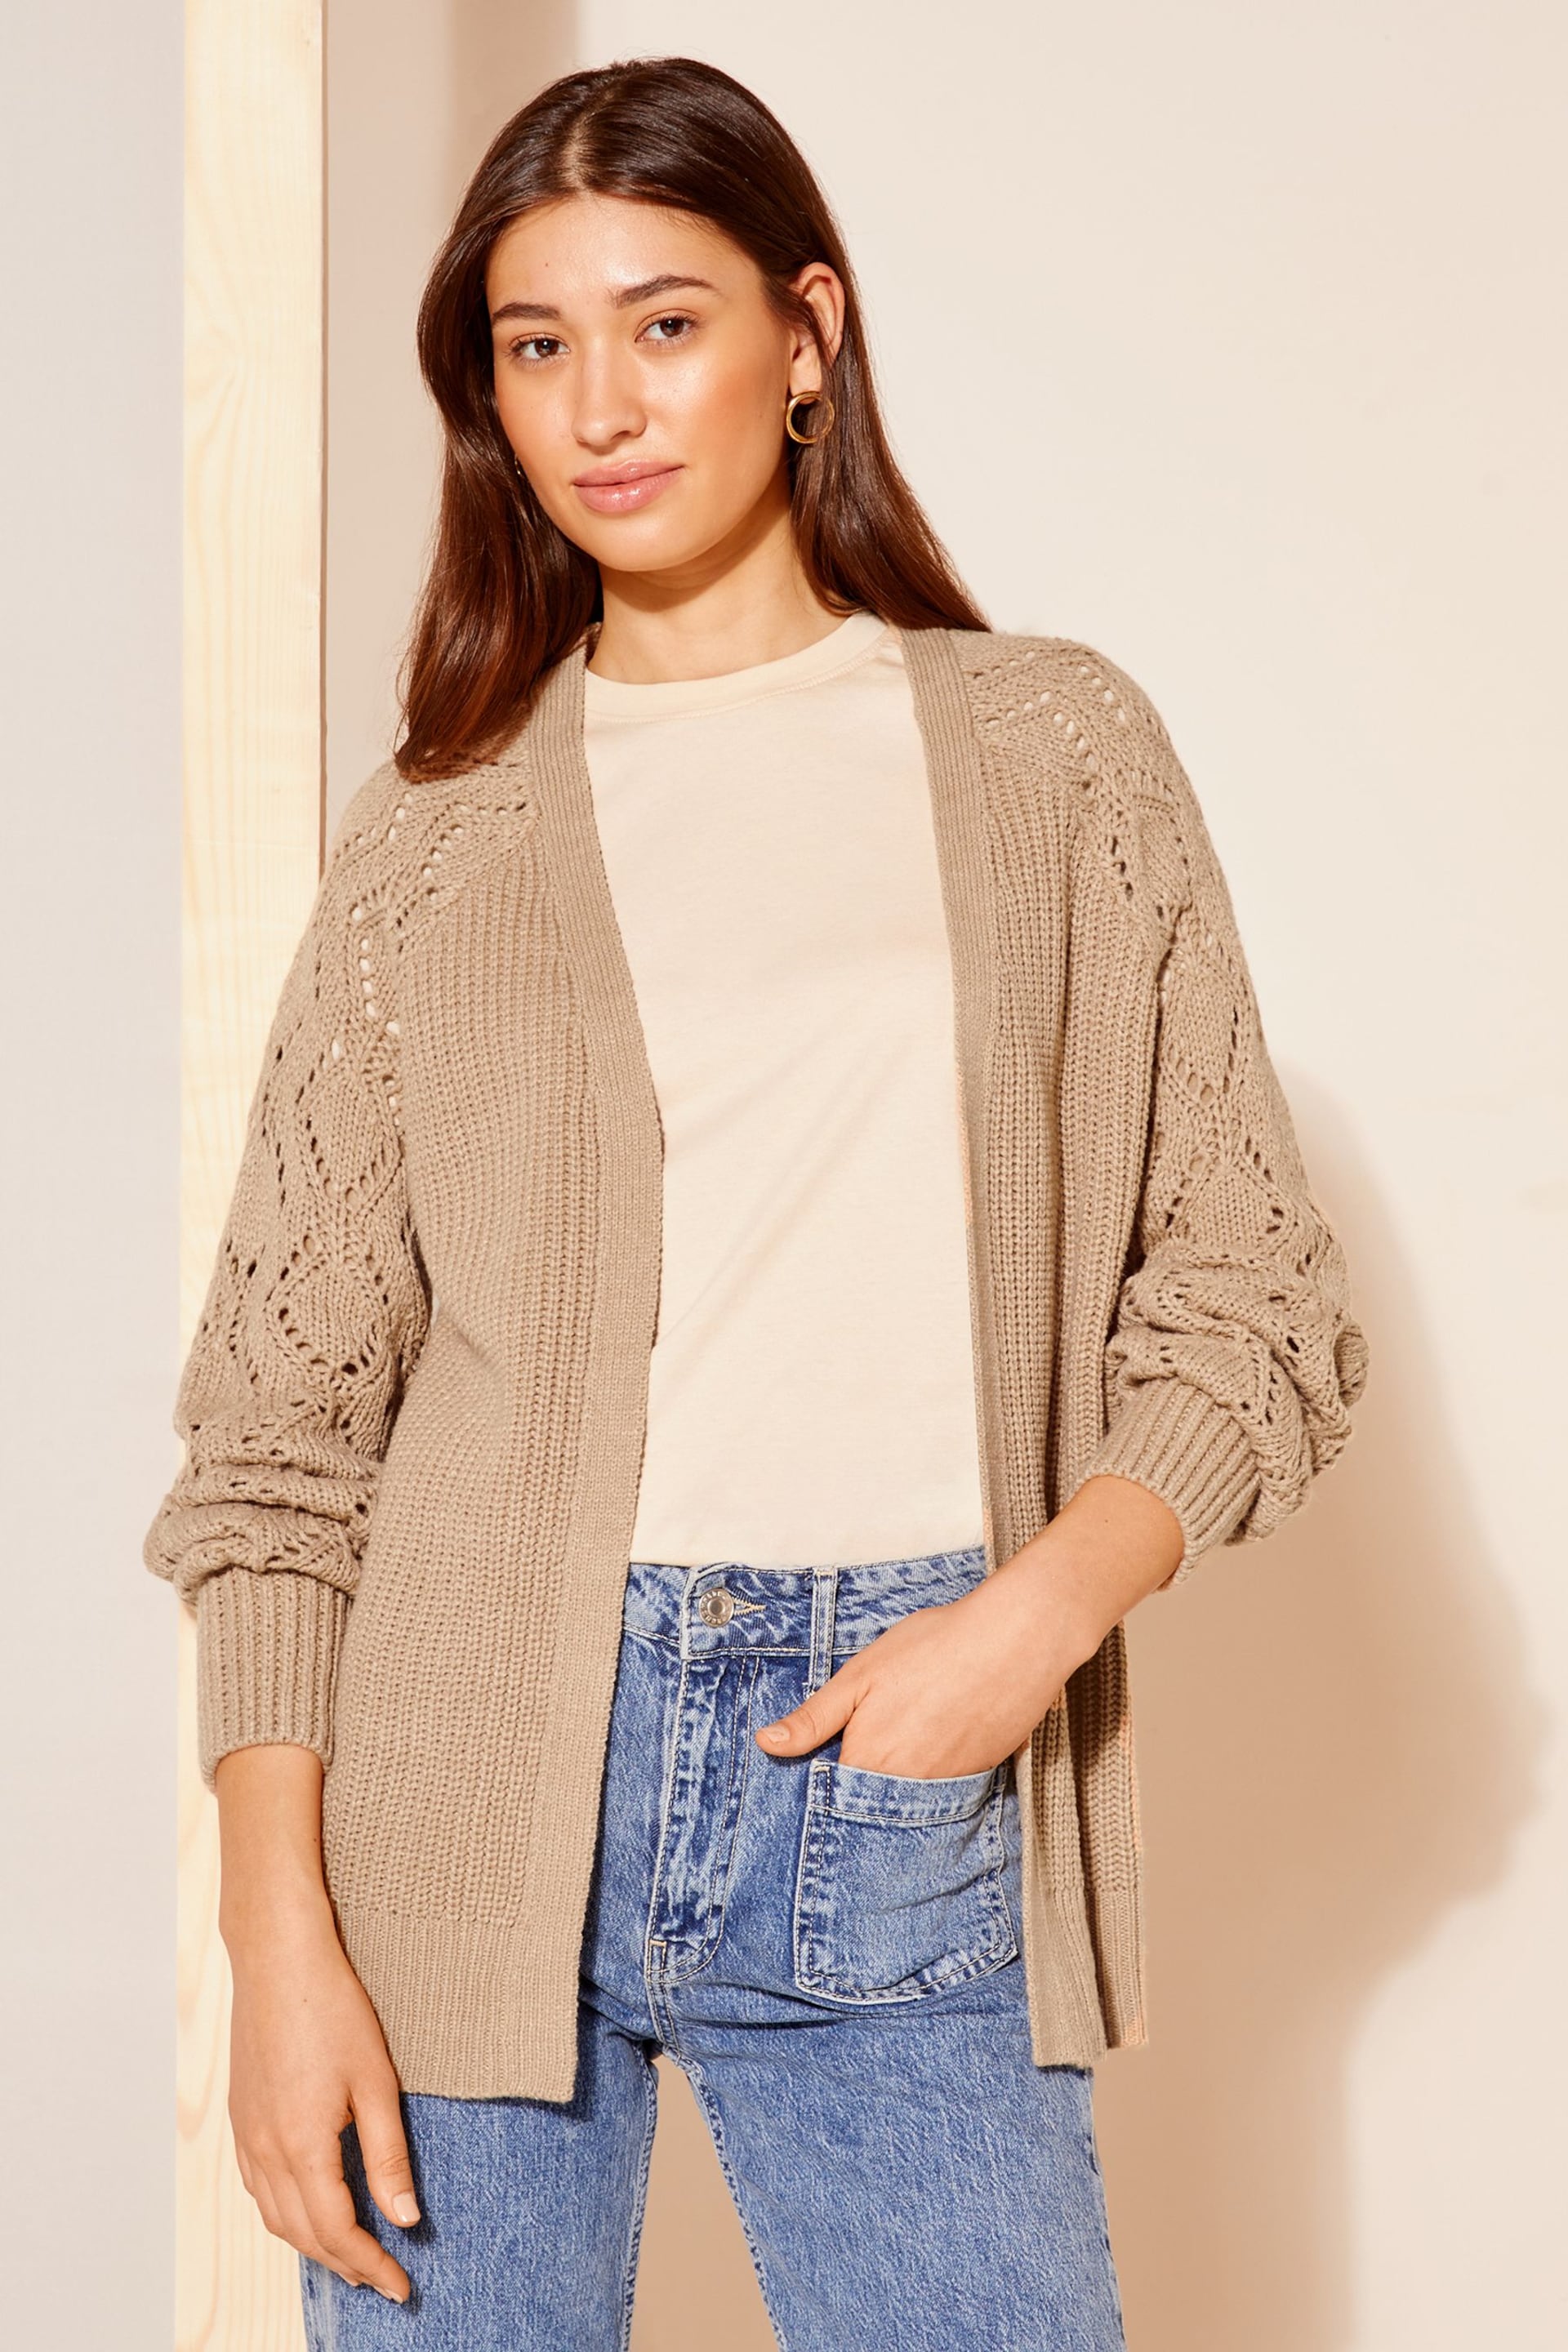 Friends Like These Camel Stitch Sleeve Crochet Cardigan - Image 1 of 4